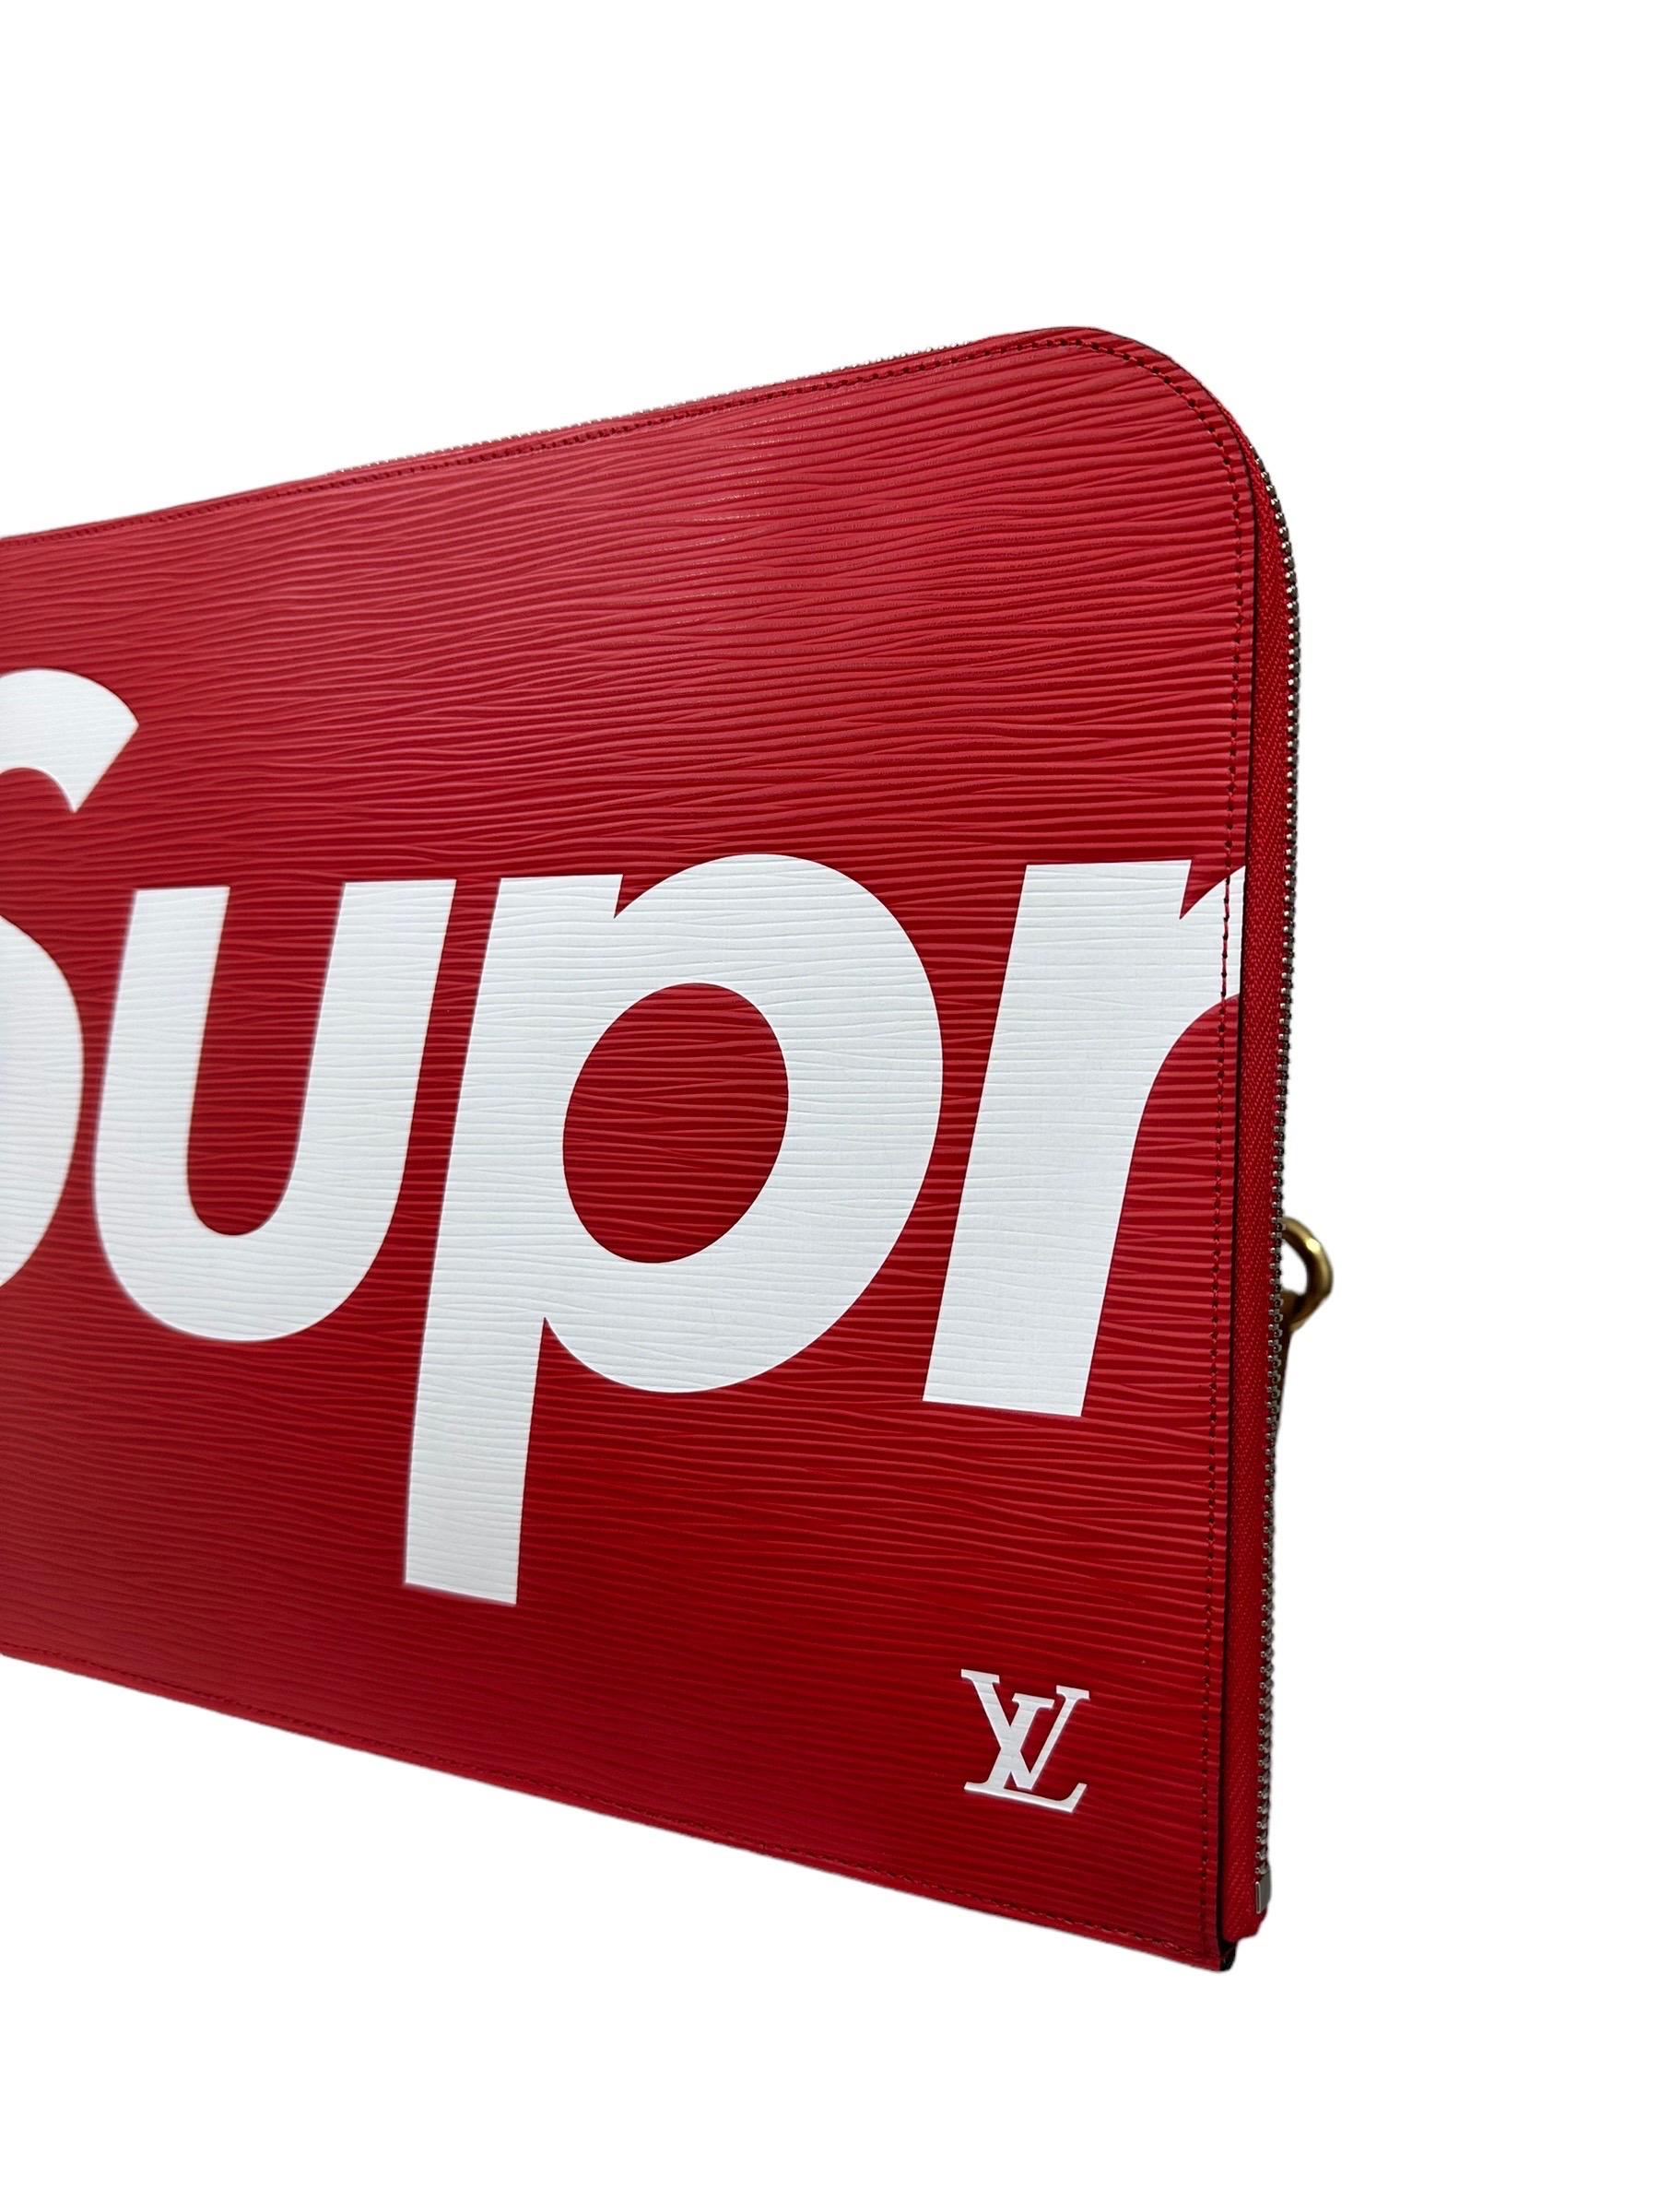 Louis Vuitton signed clutch, Jour model, size GM, limited edition in collaboration with Supreme. Made of red leather with white lettering on the front and back and silver hardware. Equipped with a zip closure, internally lined in black suede, quite